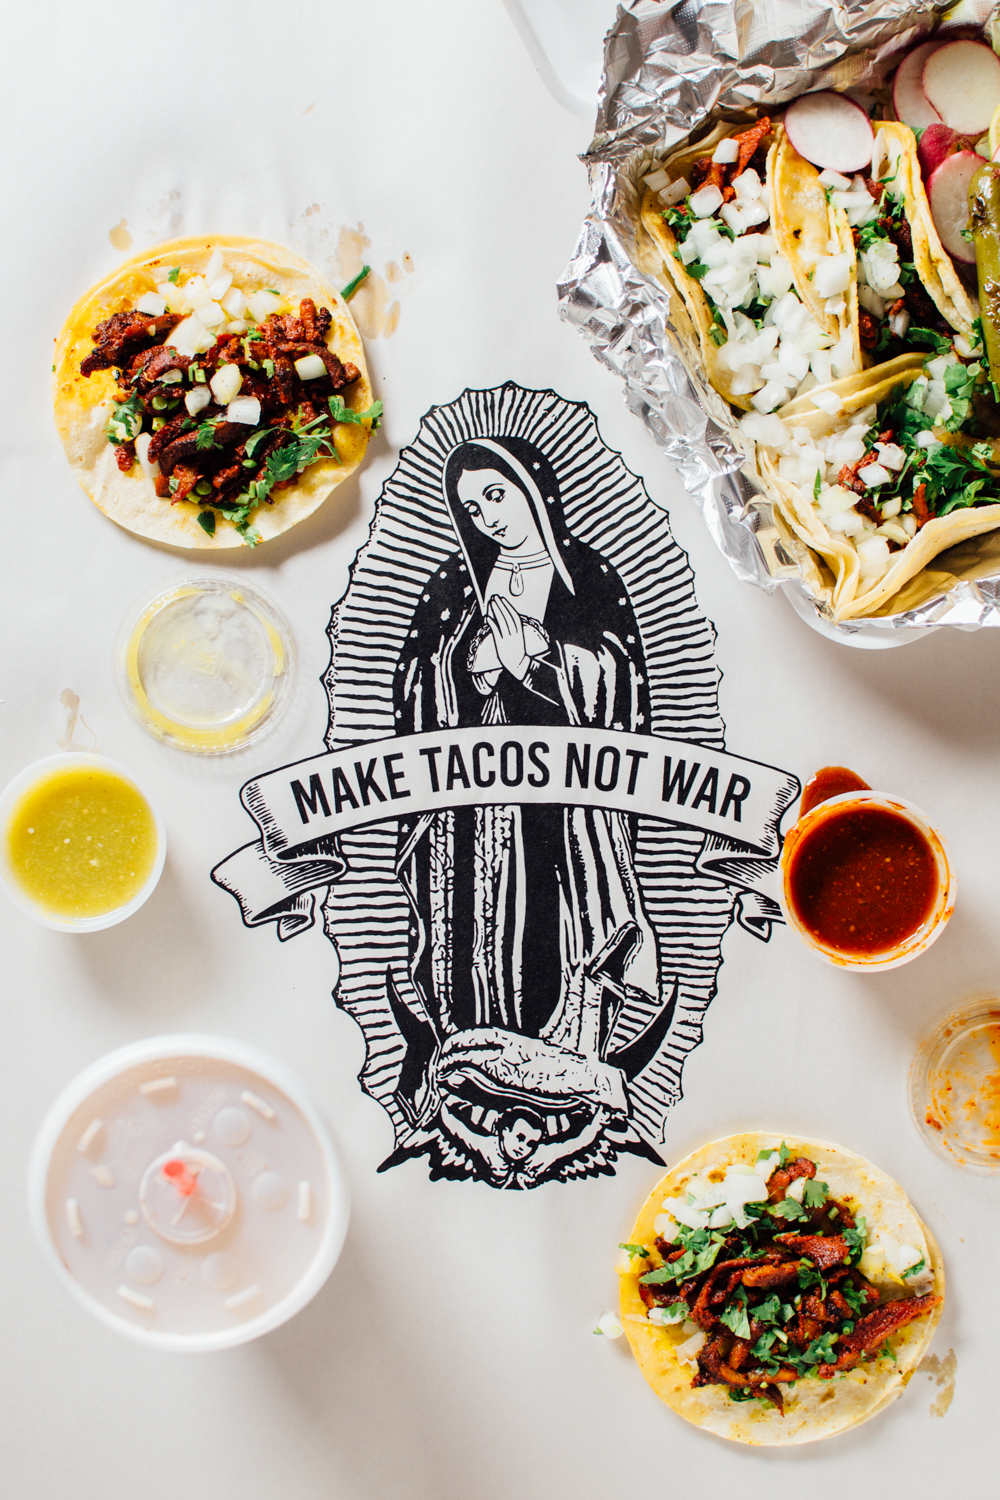 Taco Recipes T-Shirts for Sale